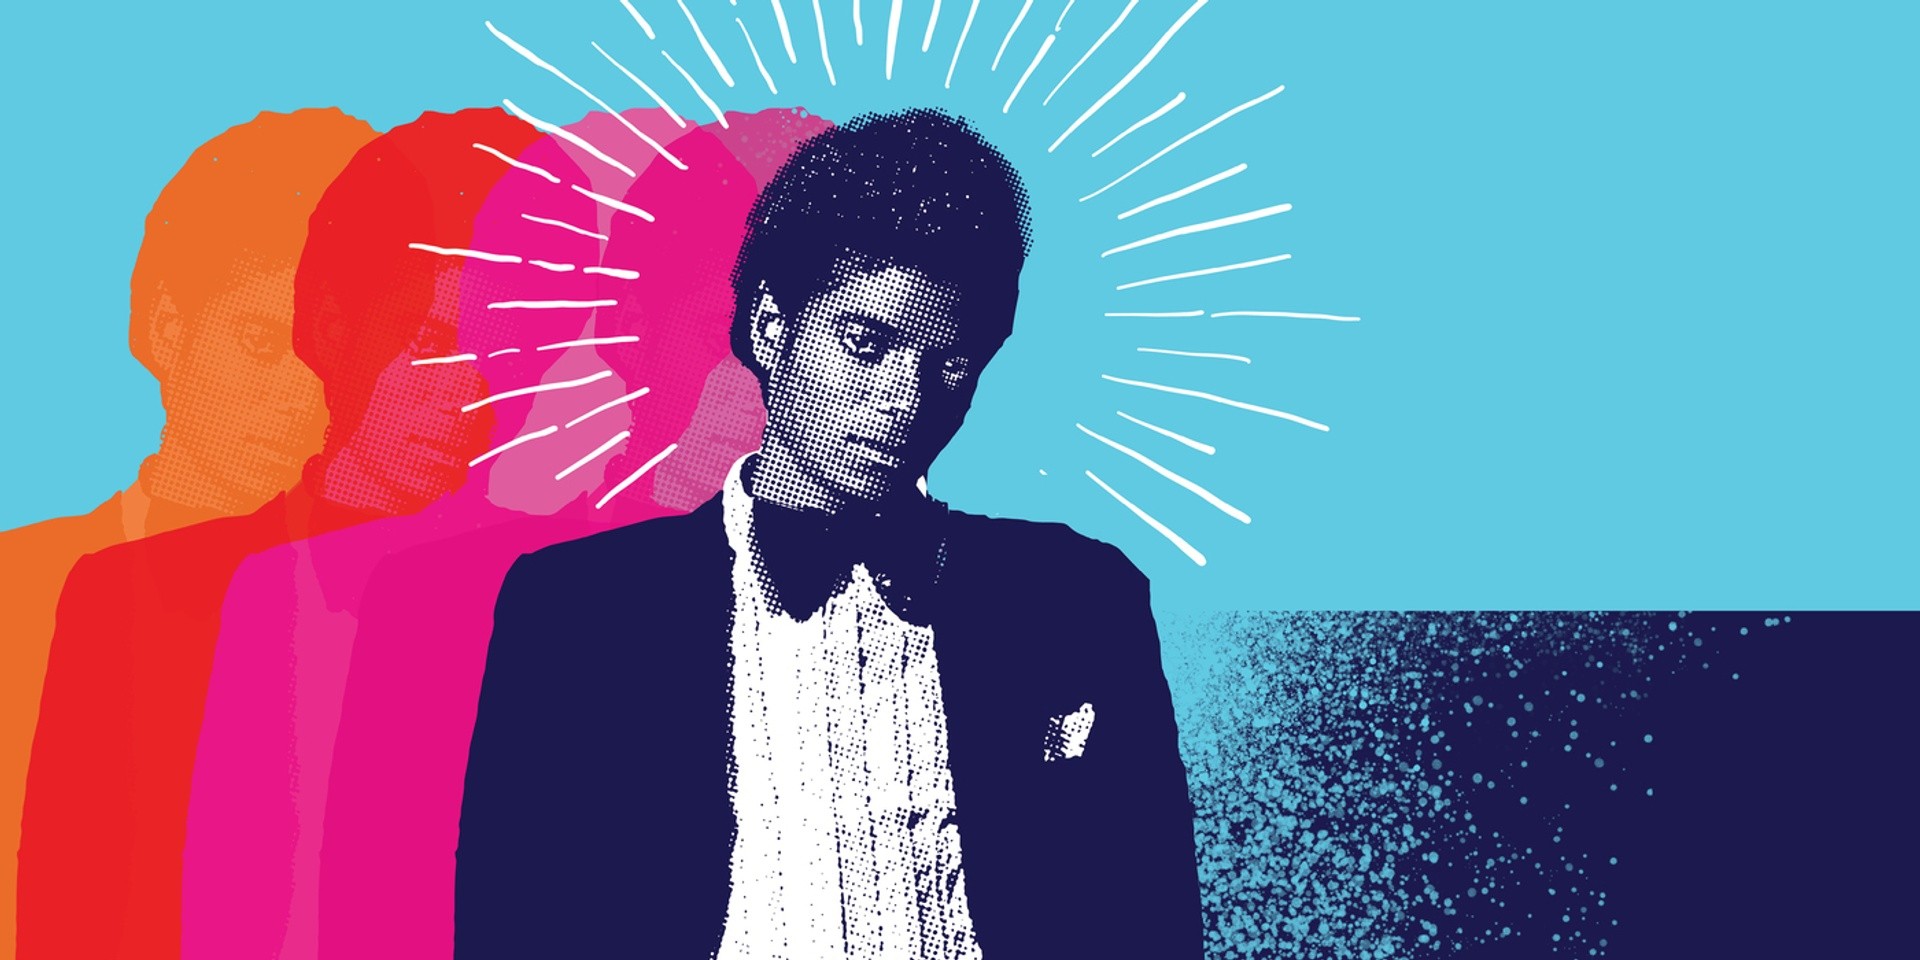 Michael Jackson's Off The Wall: The off-kilter disco masterpiece that launched a superstar